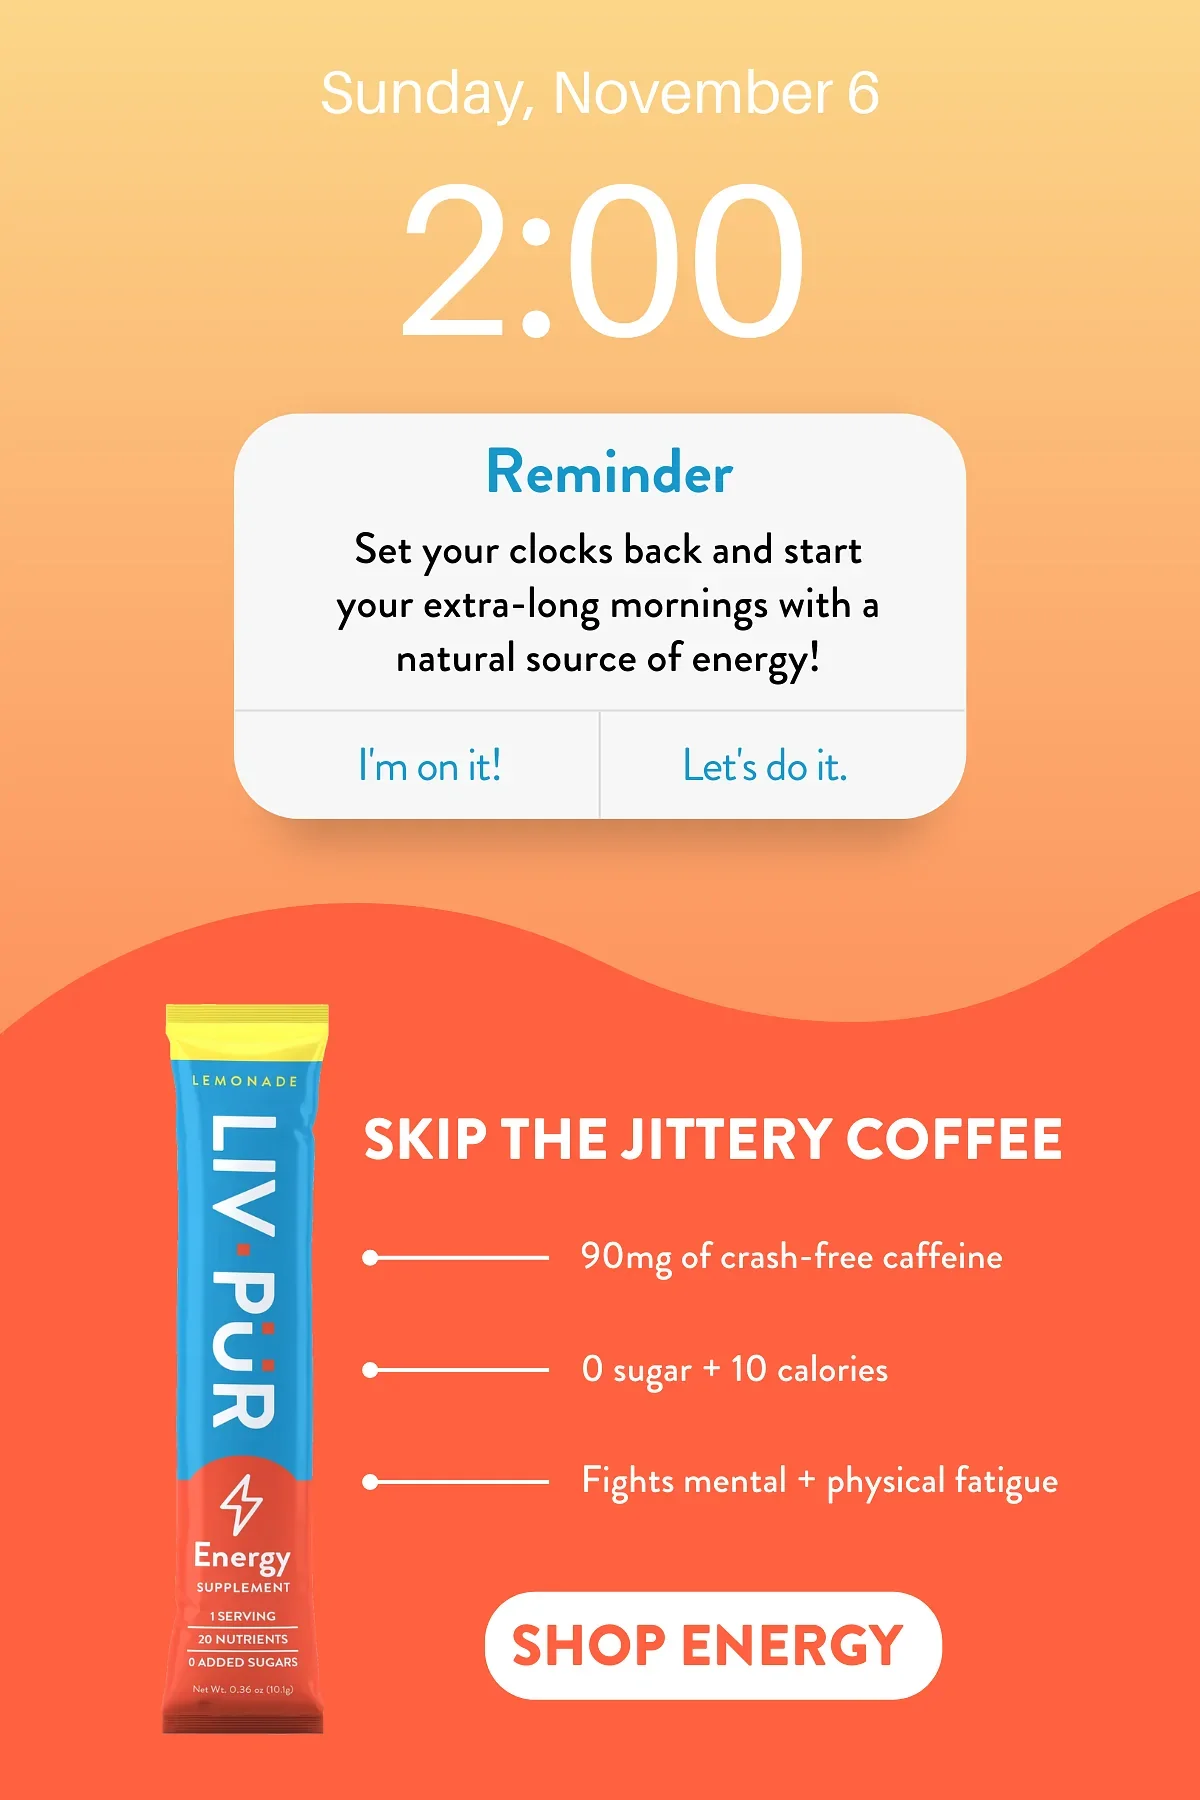 Set your clocks back and start your extra-long mornings with a natural source of energy!